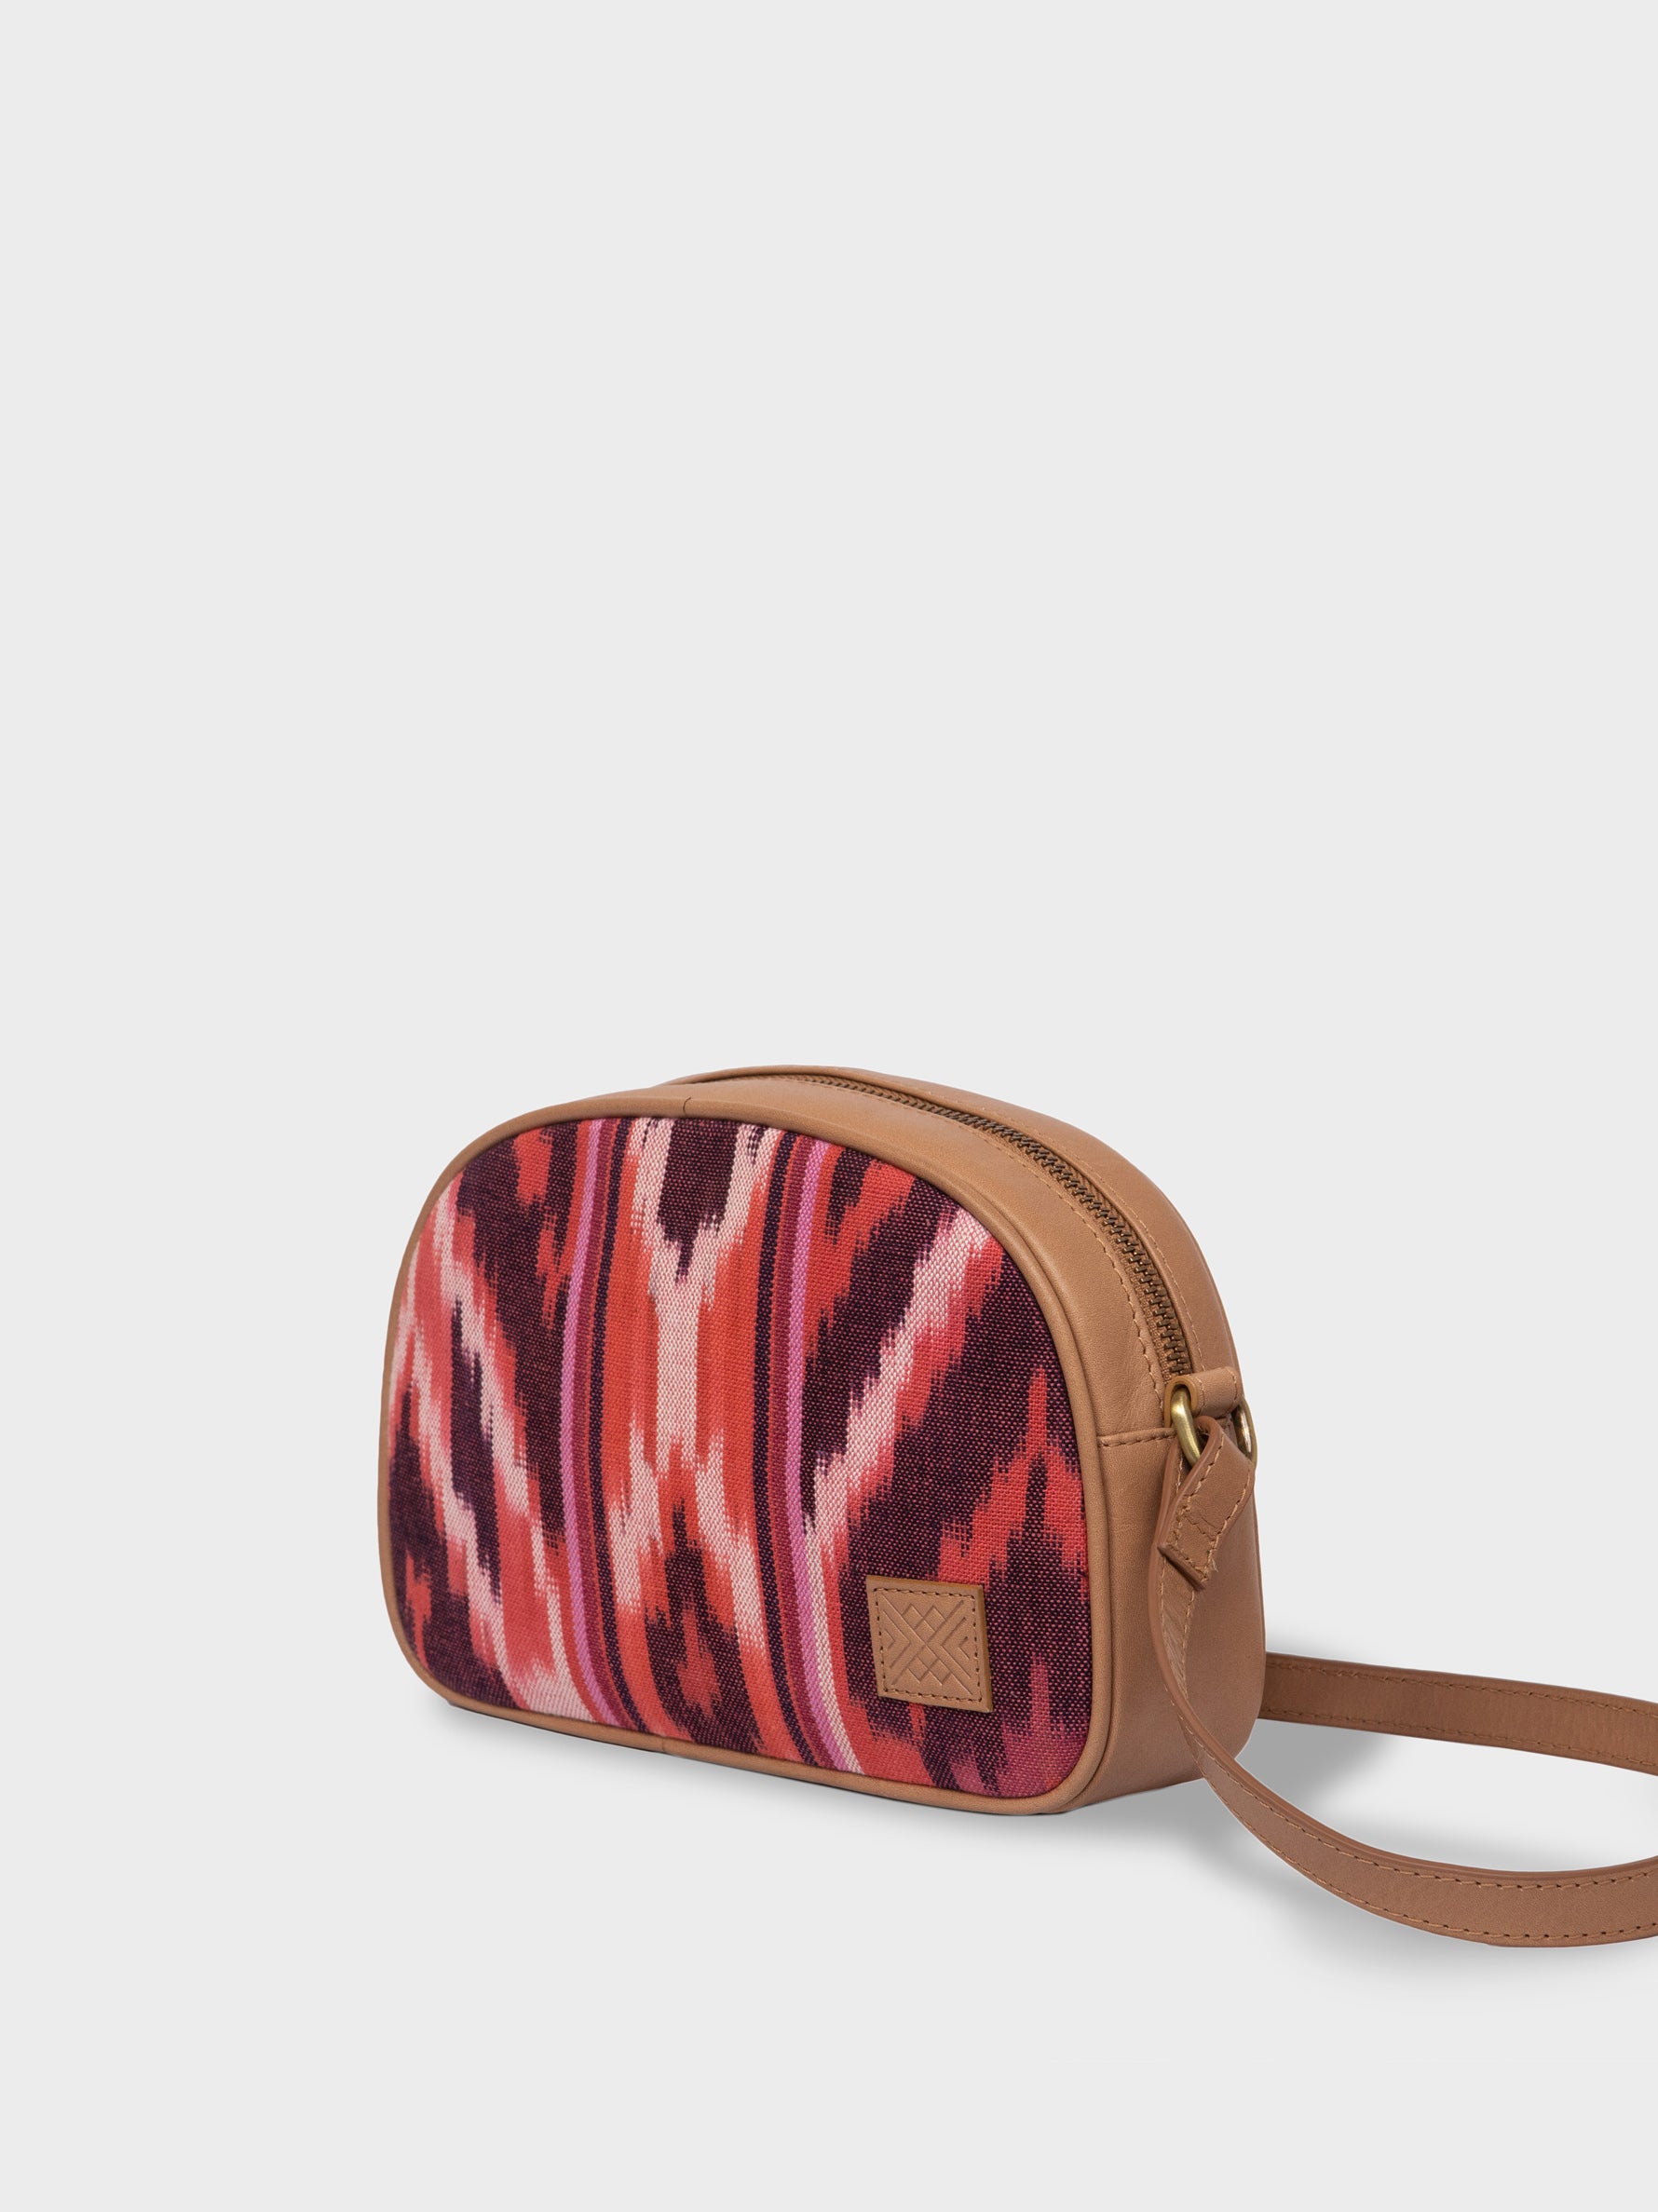 Handcrafted Premium Genuine Vegetable Tanned Leather & Pink Ikat Mini Camera Sling Bag for Women Tan & Loom